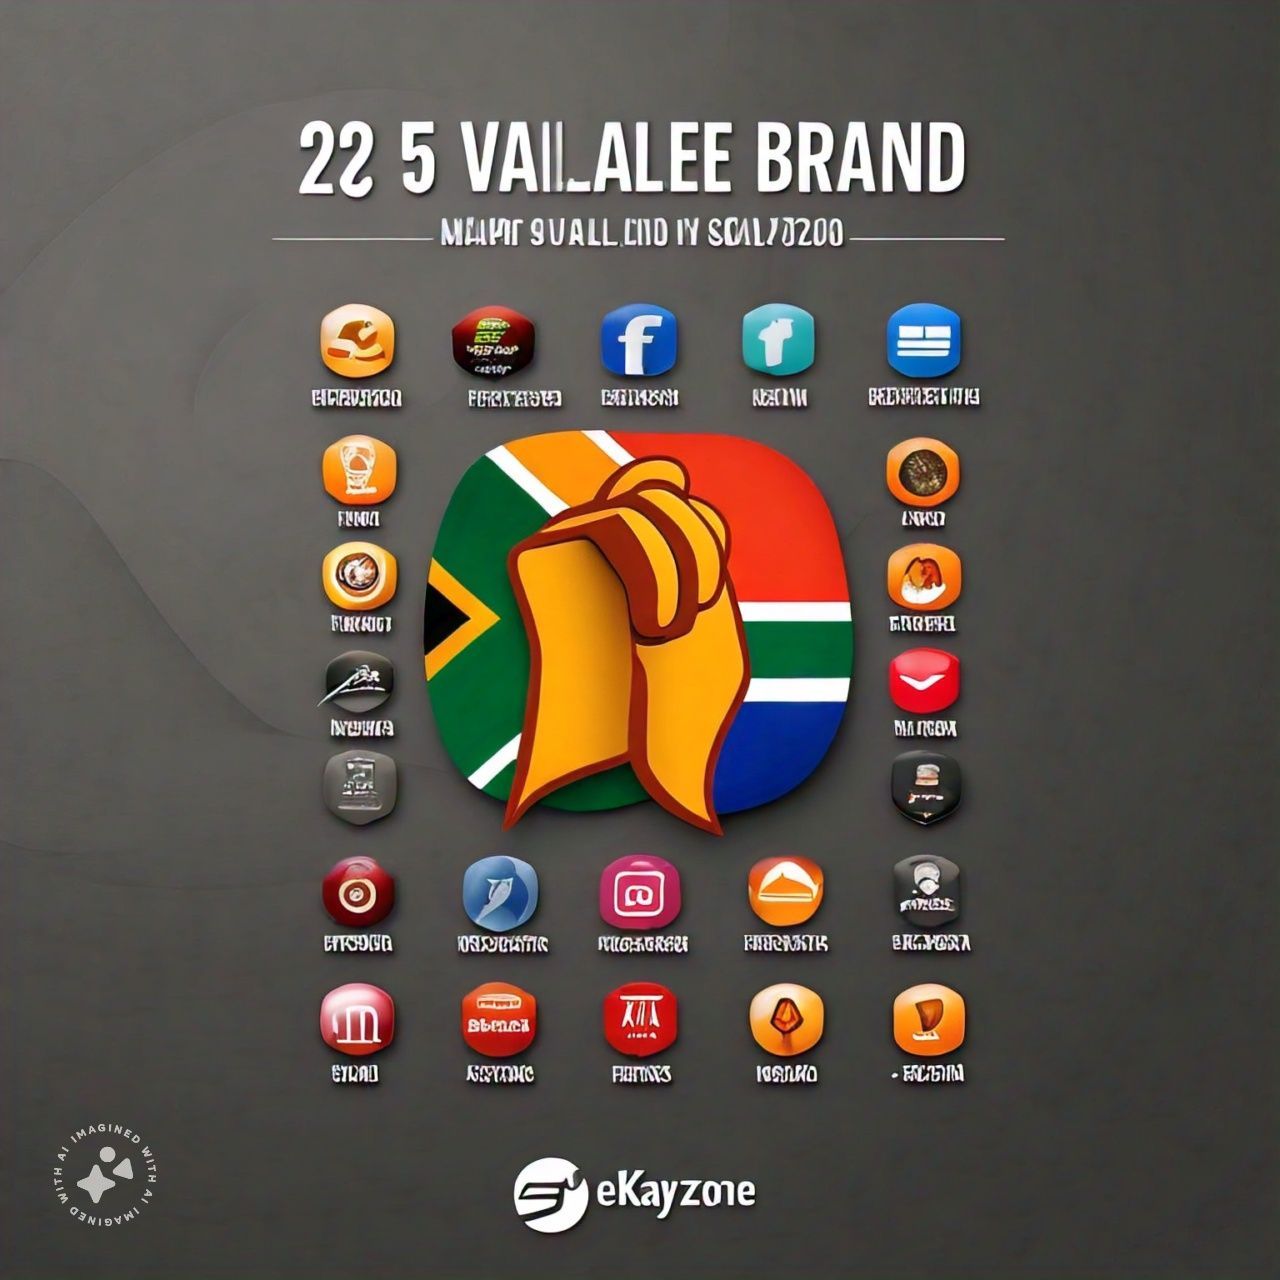 The list of 25 most important company brands in South Africa